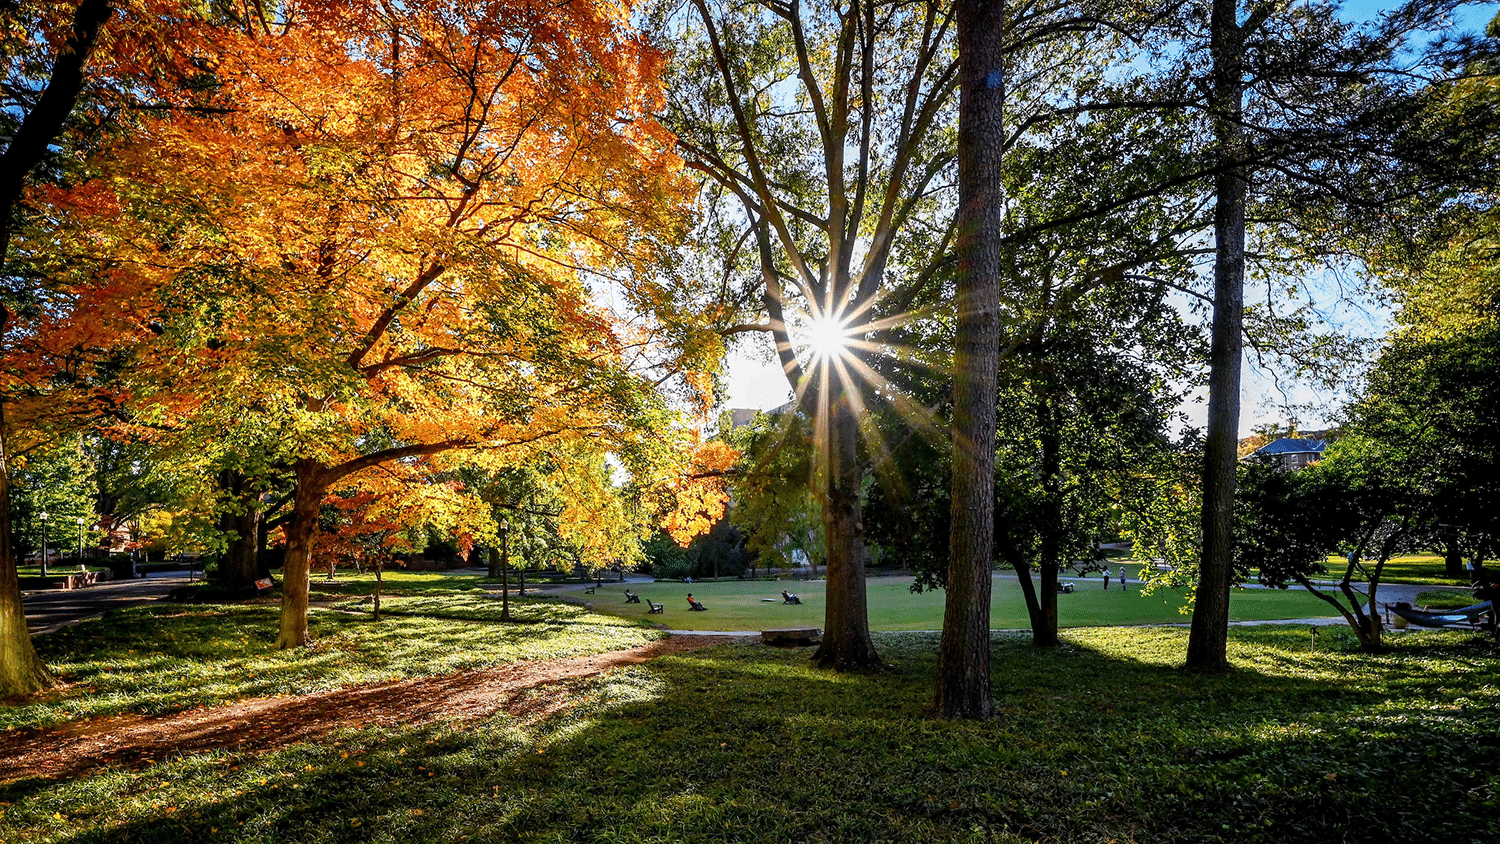 The sun shines through the trees on the Court of North Carolina on a fall day.